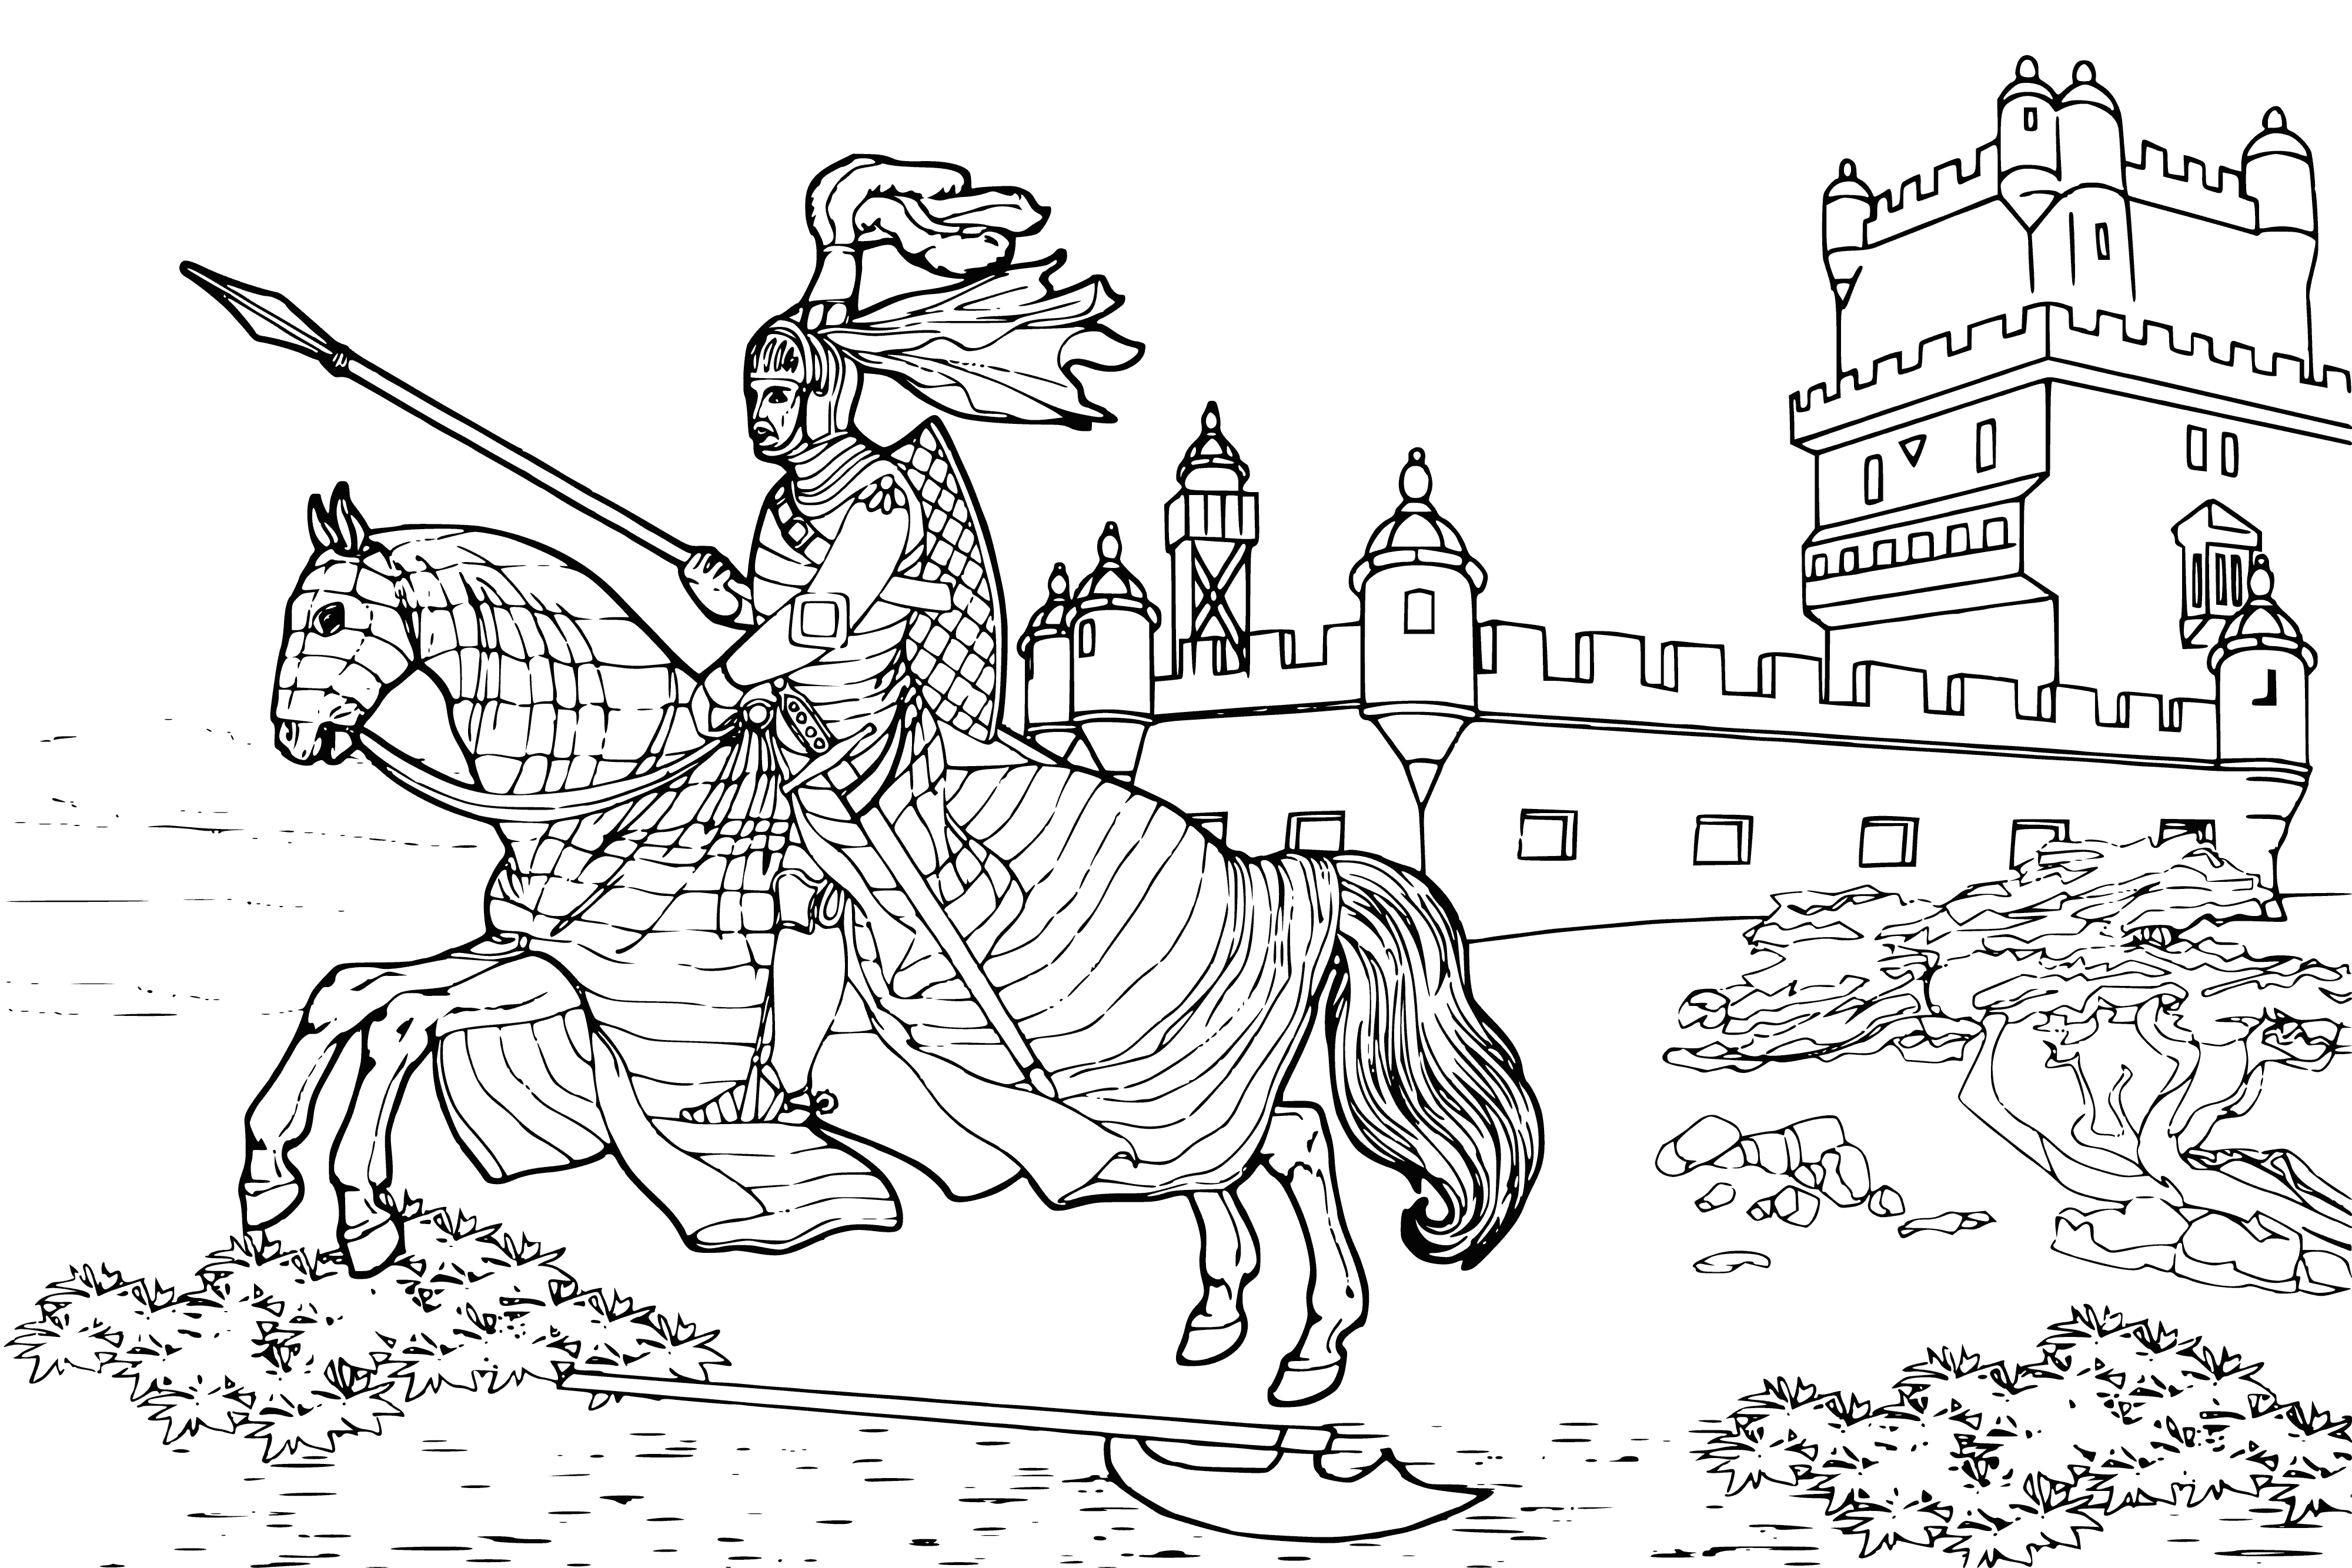 coloring page: Hero on horse, wearing armor, holds sword & shield. Ready to fight for their country, brave and strong. #hero